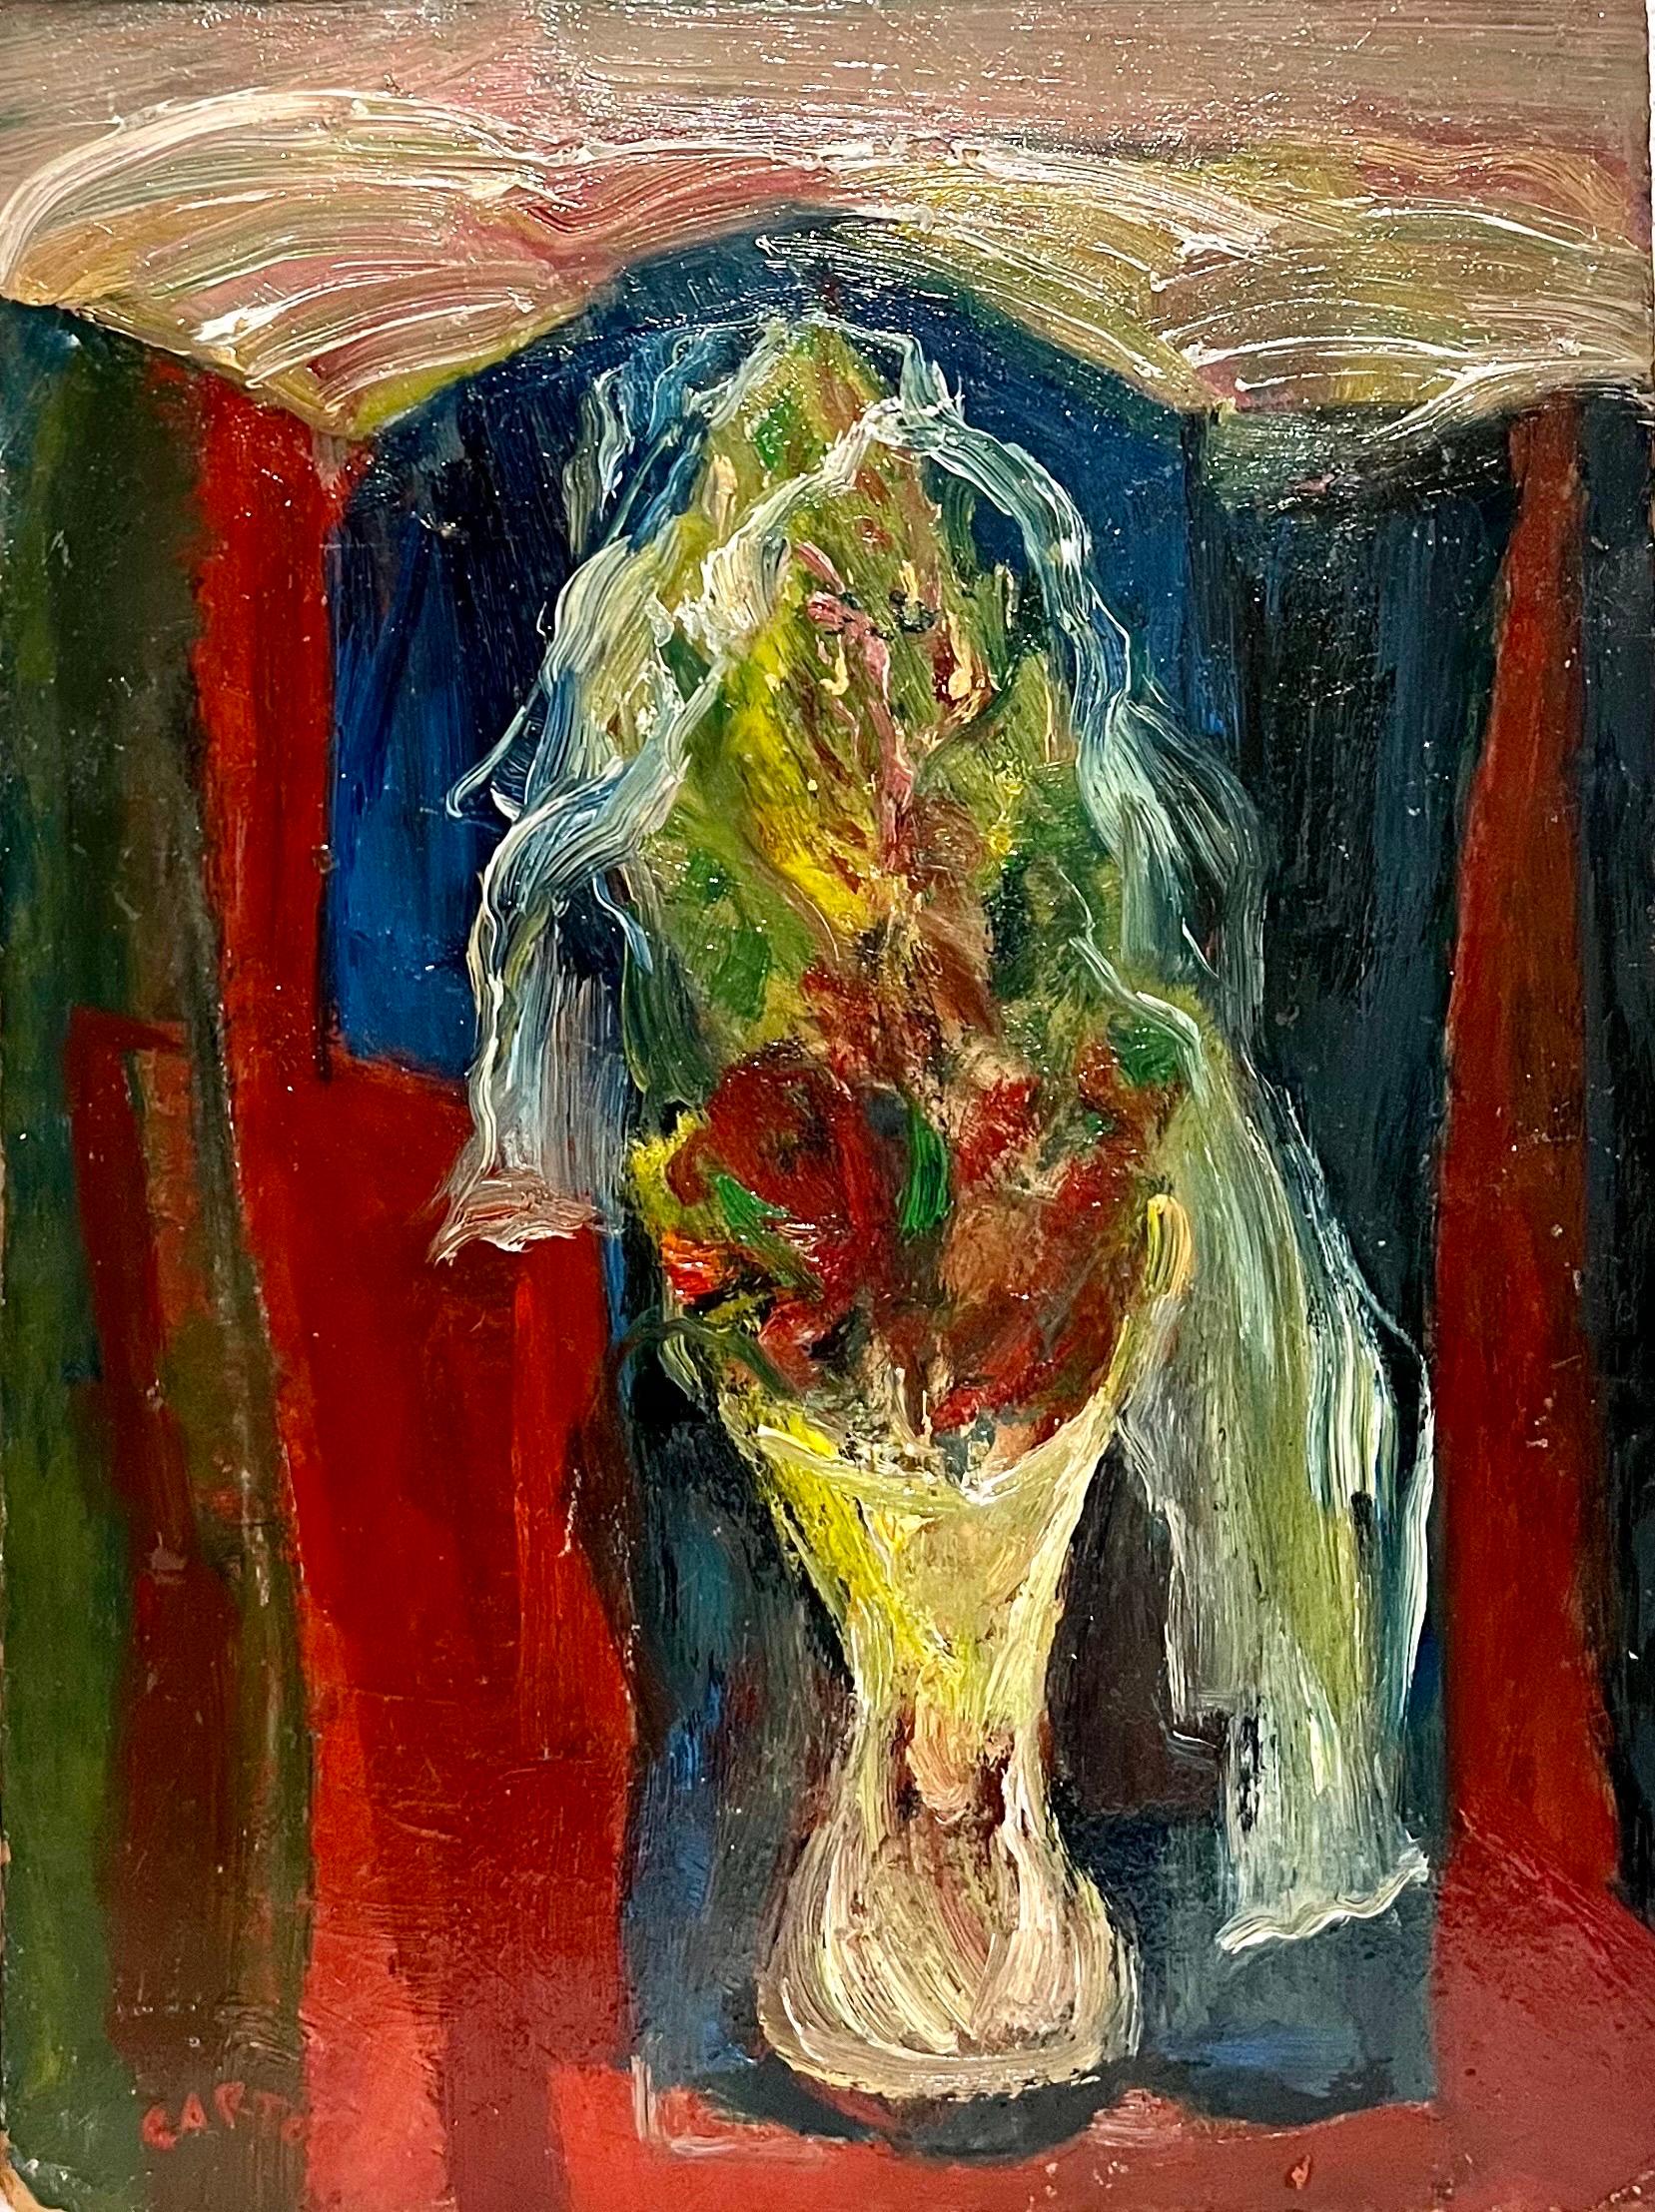 American Abstract Expressionist Flowers Oil Painting Norman Carton WPA Artist